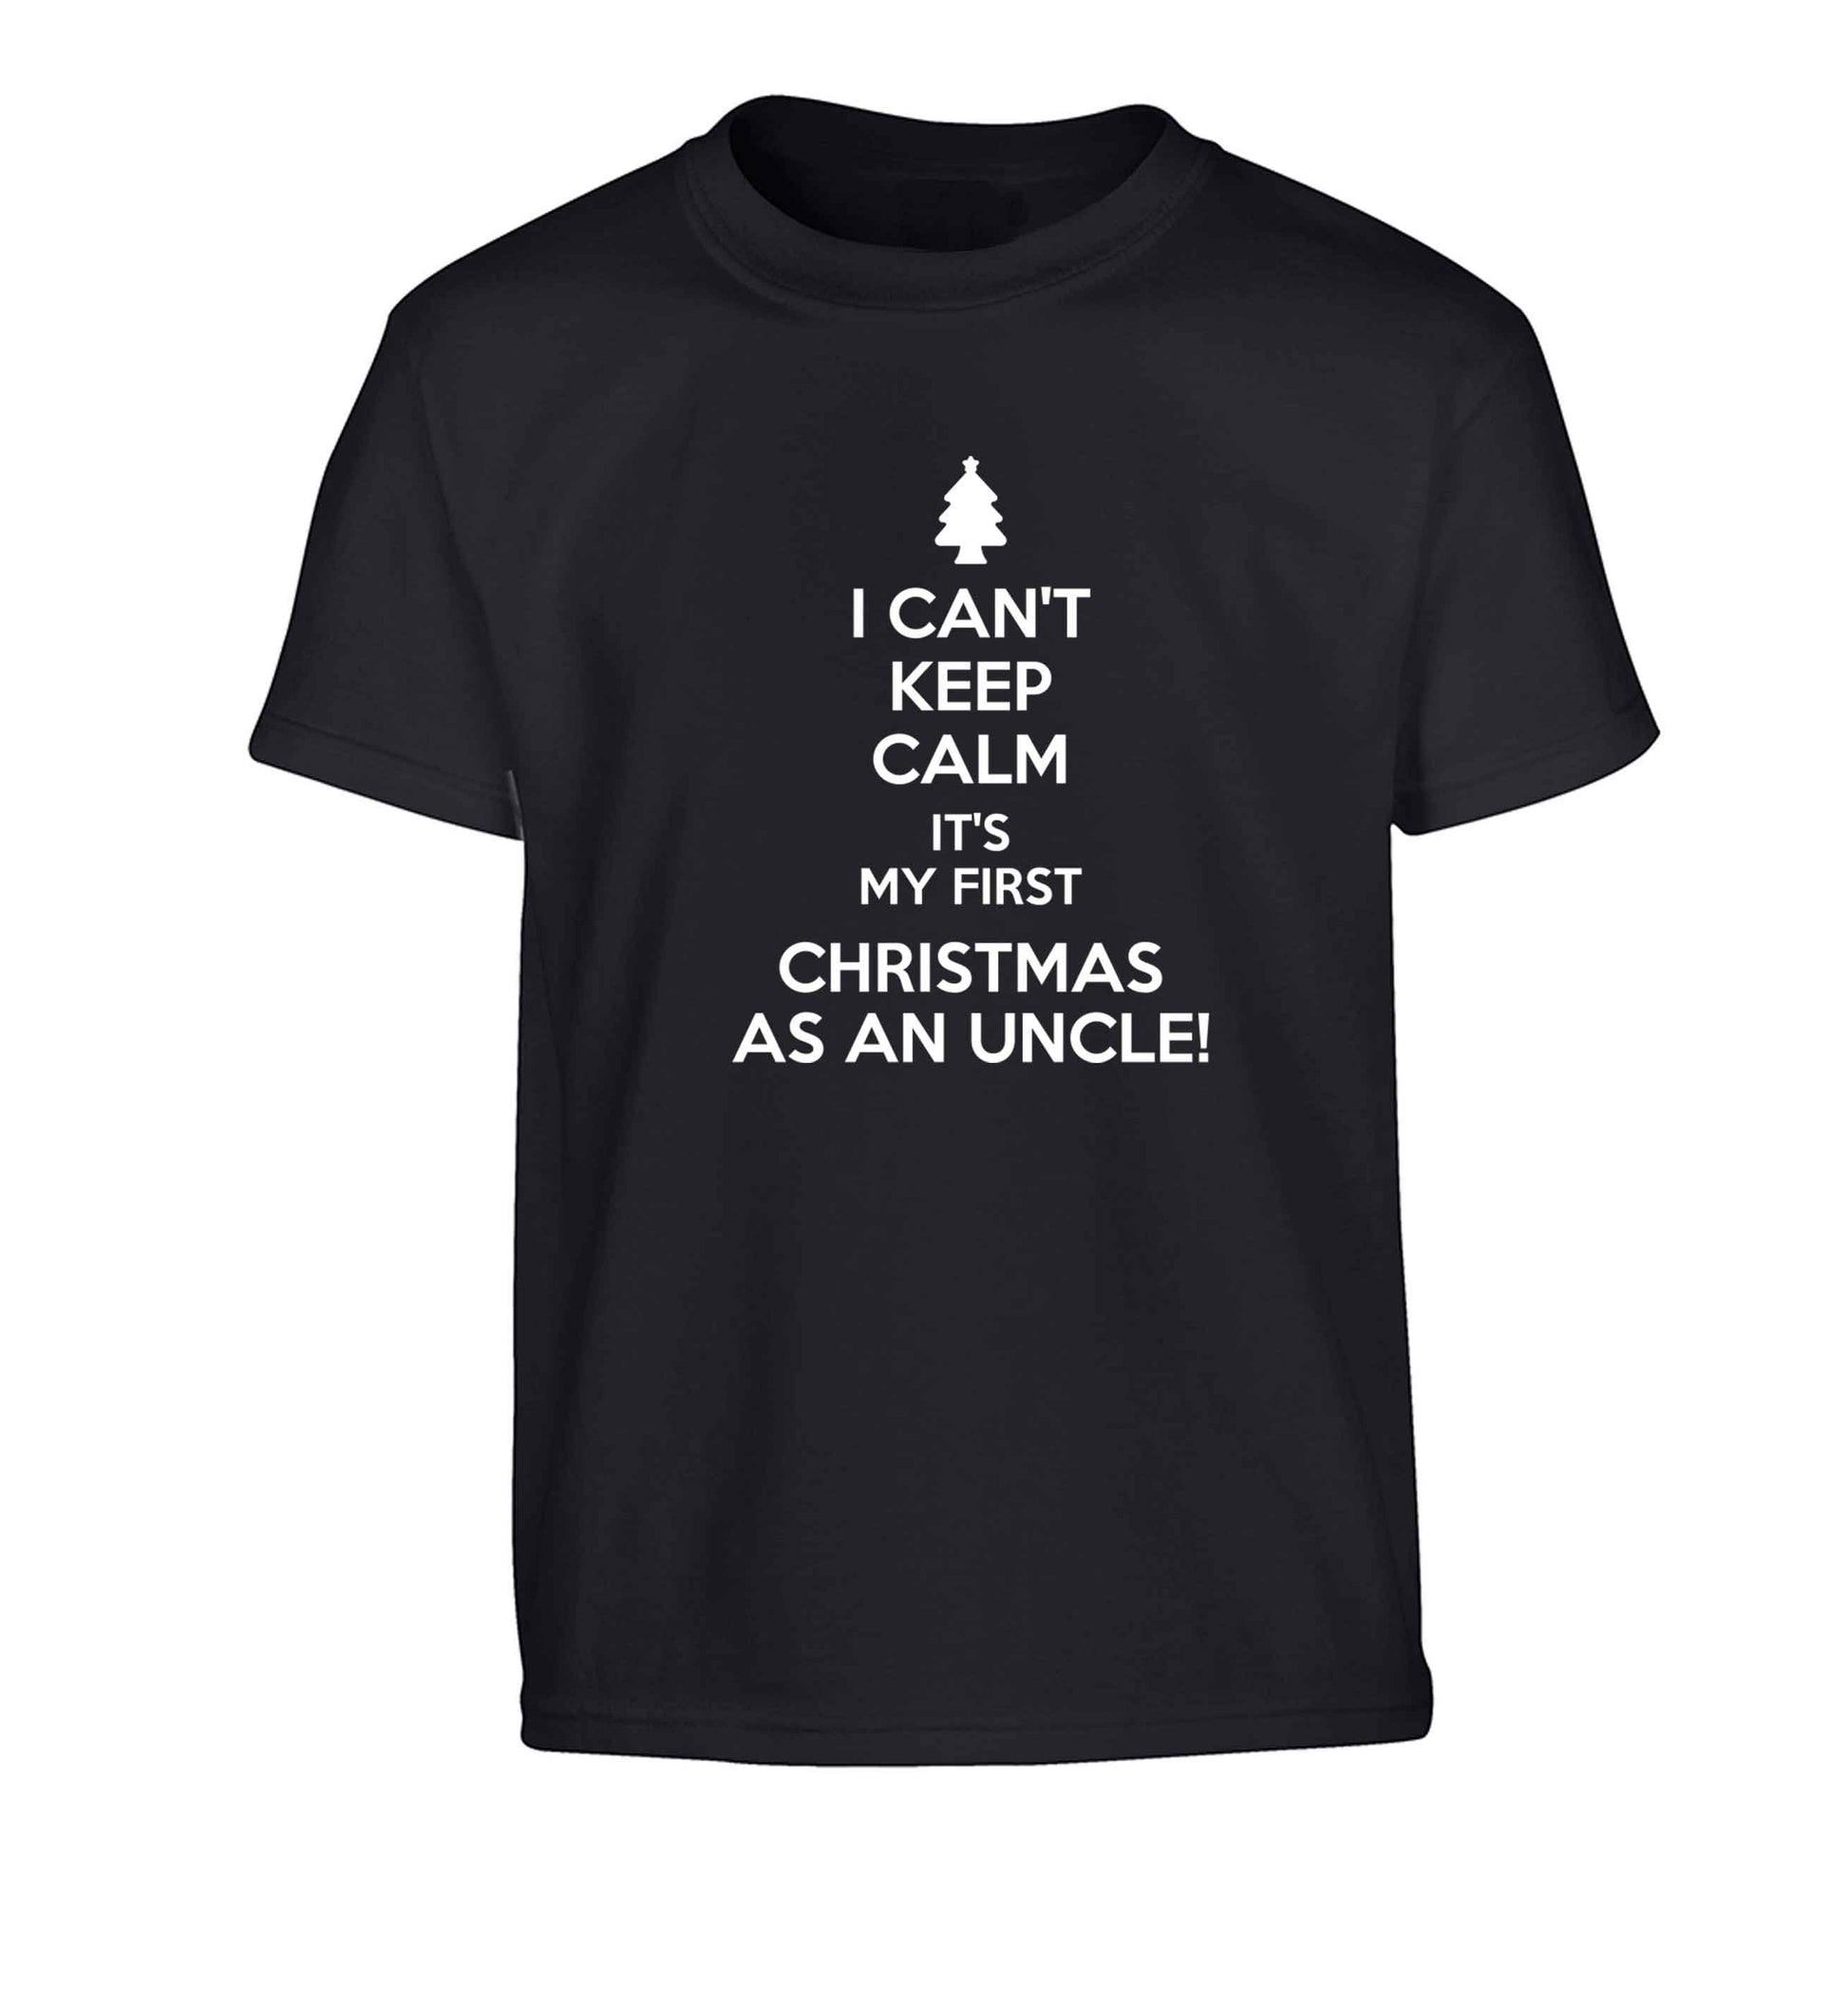 I can't keep calm it's my first Christmas as an uncle! Children's black Tshirt 12-13 Years